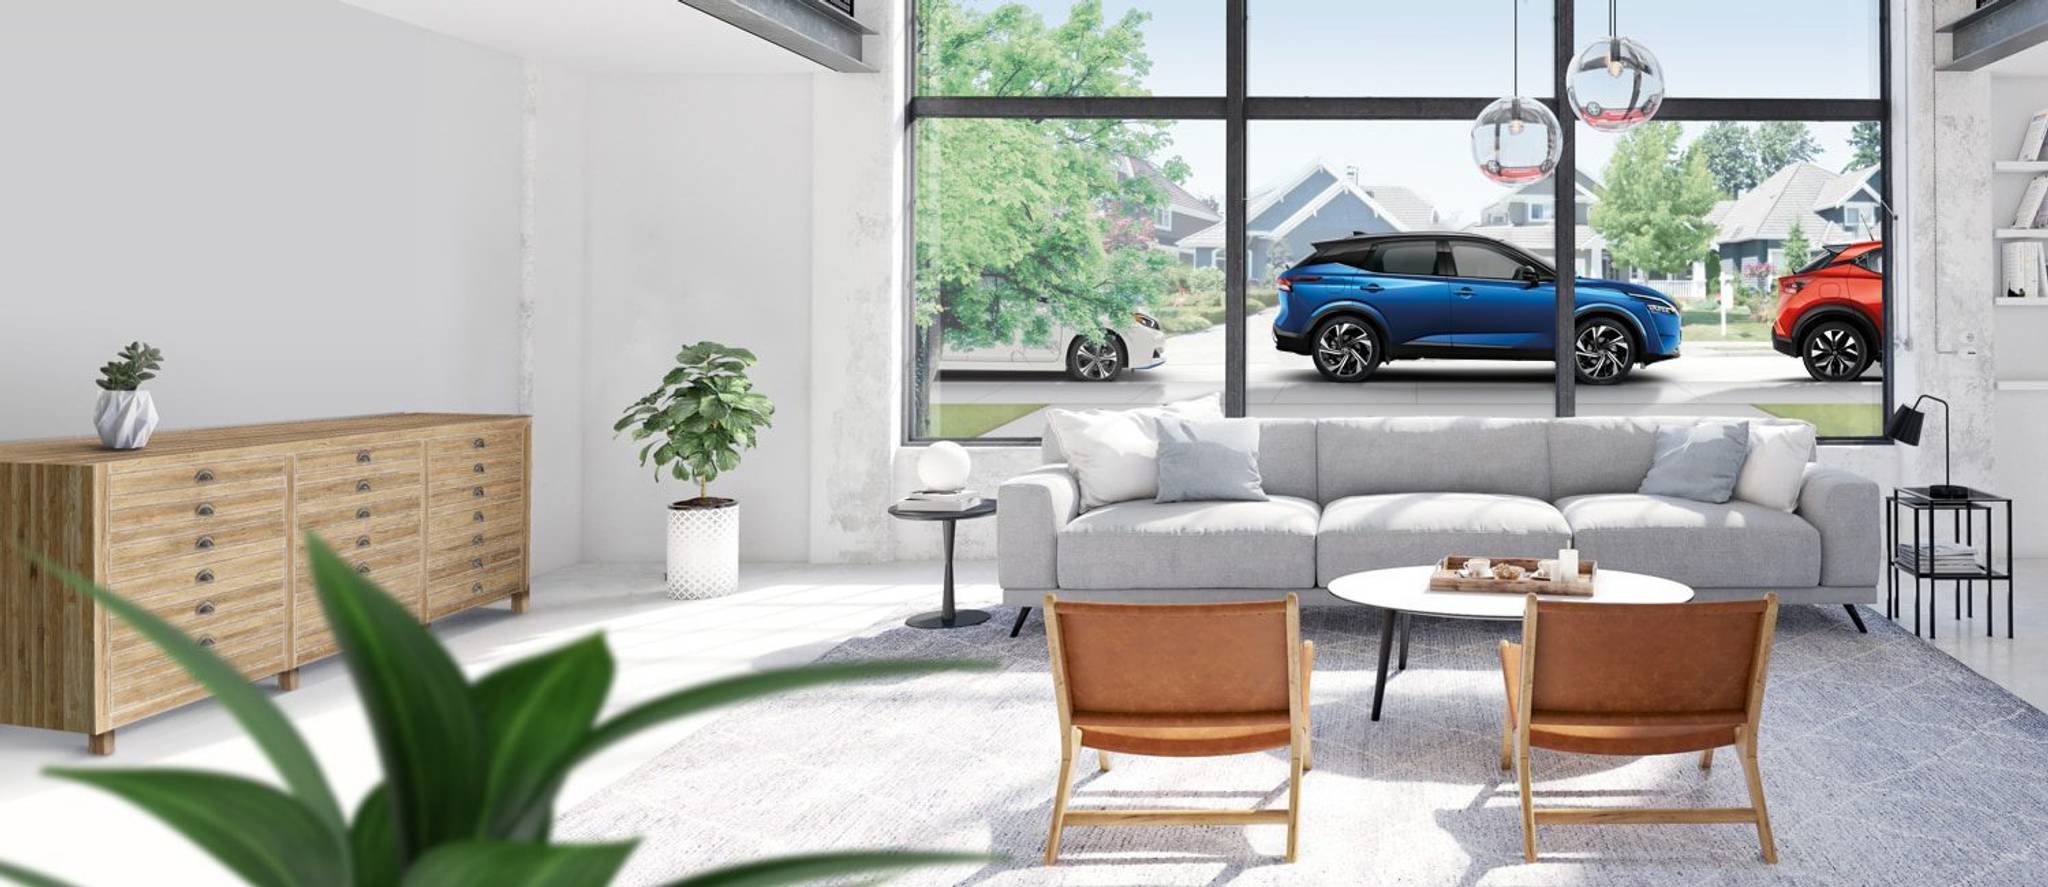 Nissan at Home: buying a car from your couch